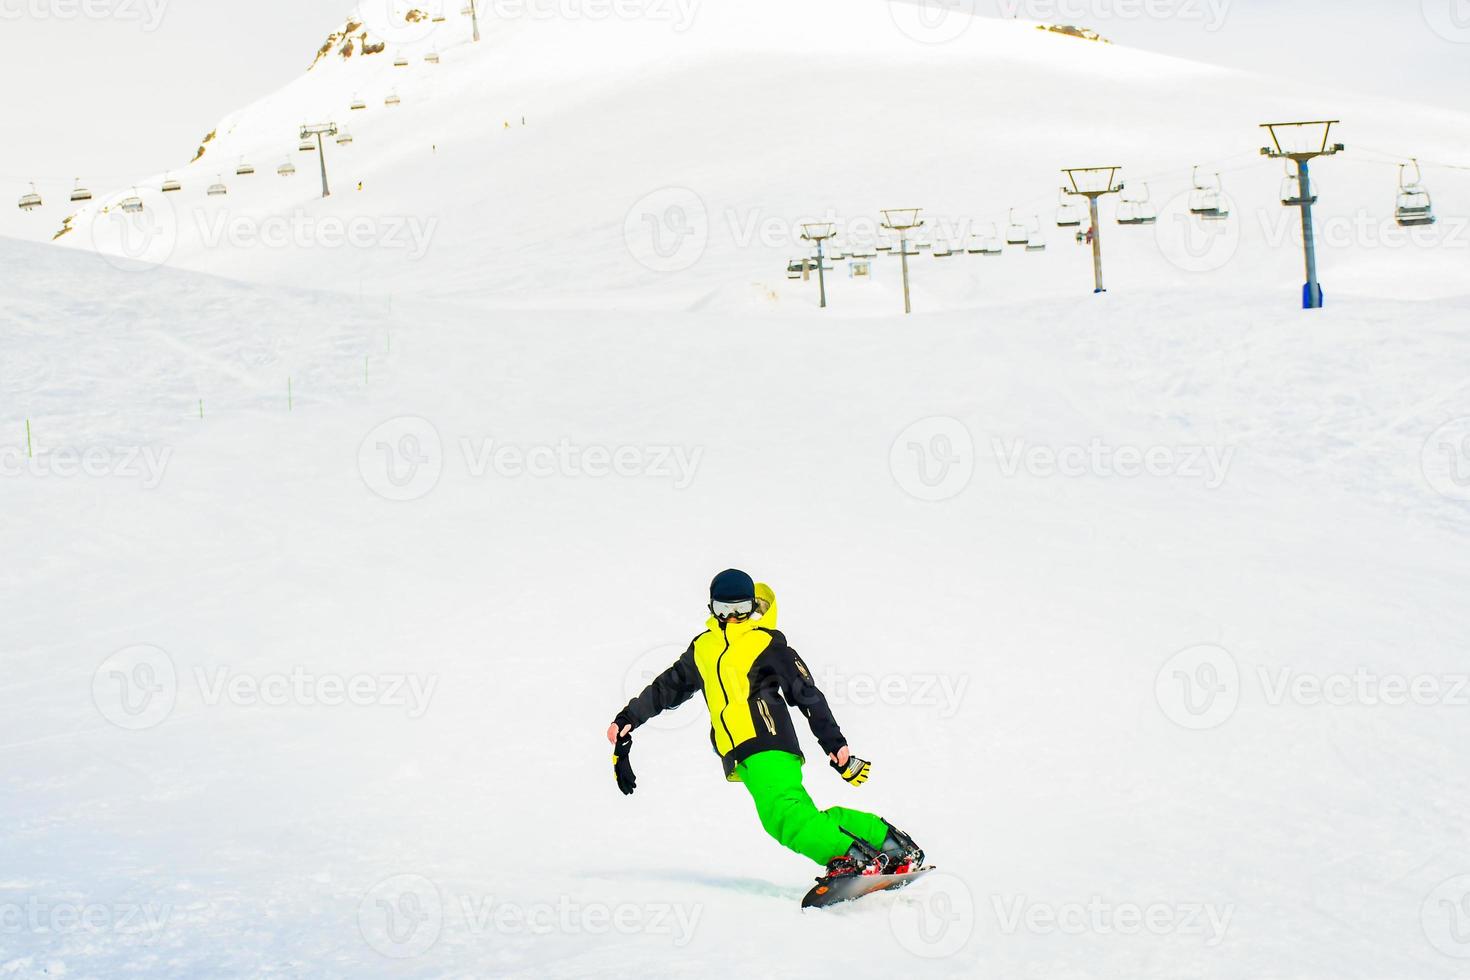 Gudauri, Georgia, 2022 - caucasian boy snowboard on slope front view stylish alone with no helmet and gloves in cold winter conditions in ski resort photo